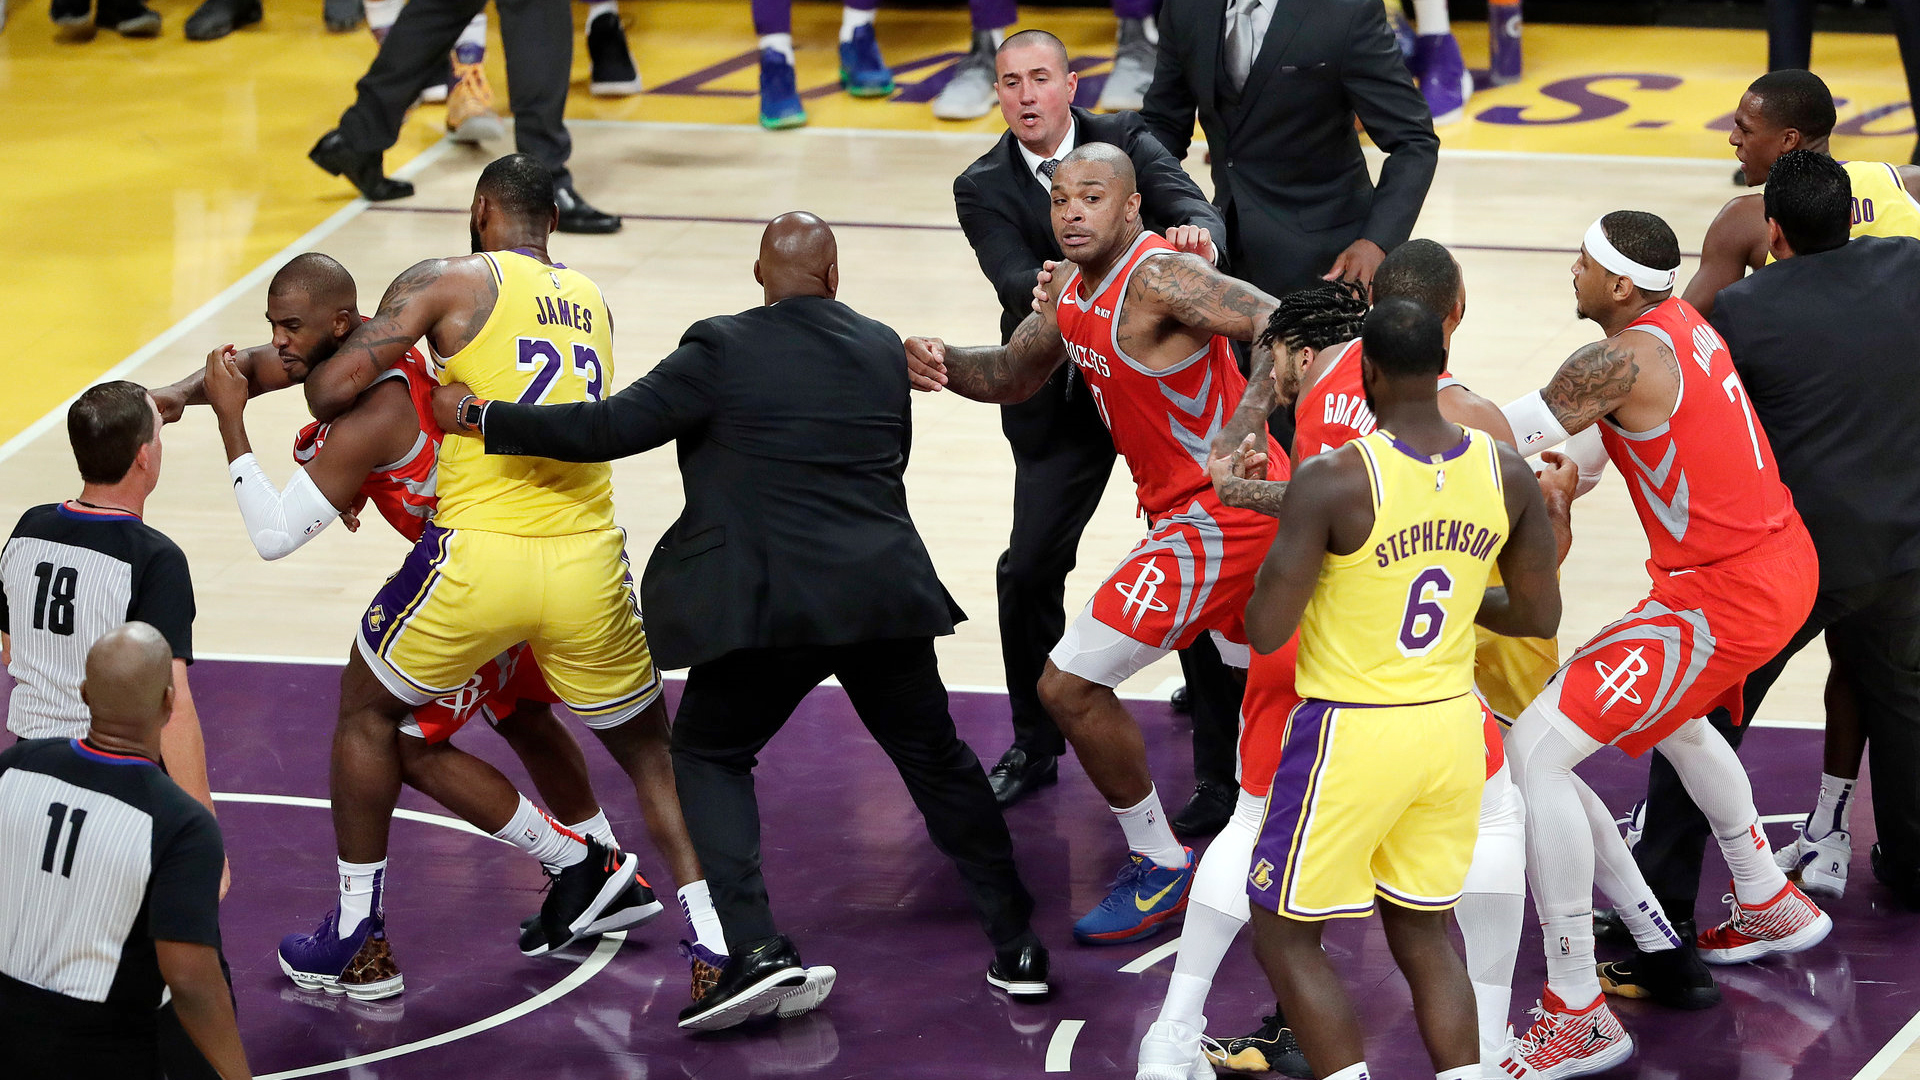 An NBA brawl between the Lakers and Rockets